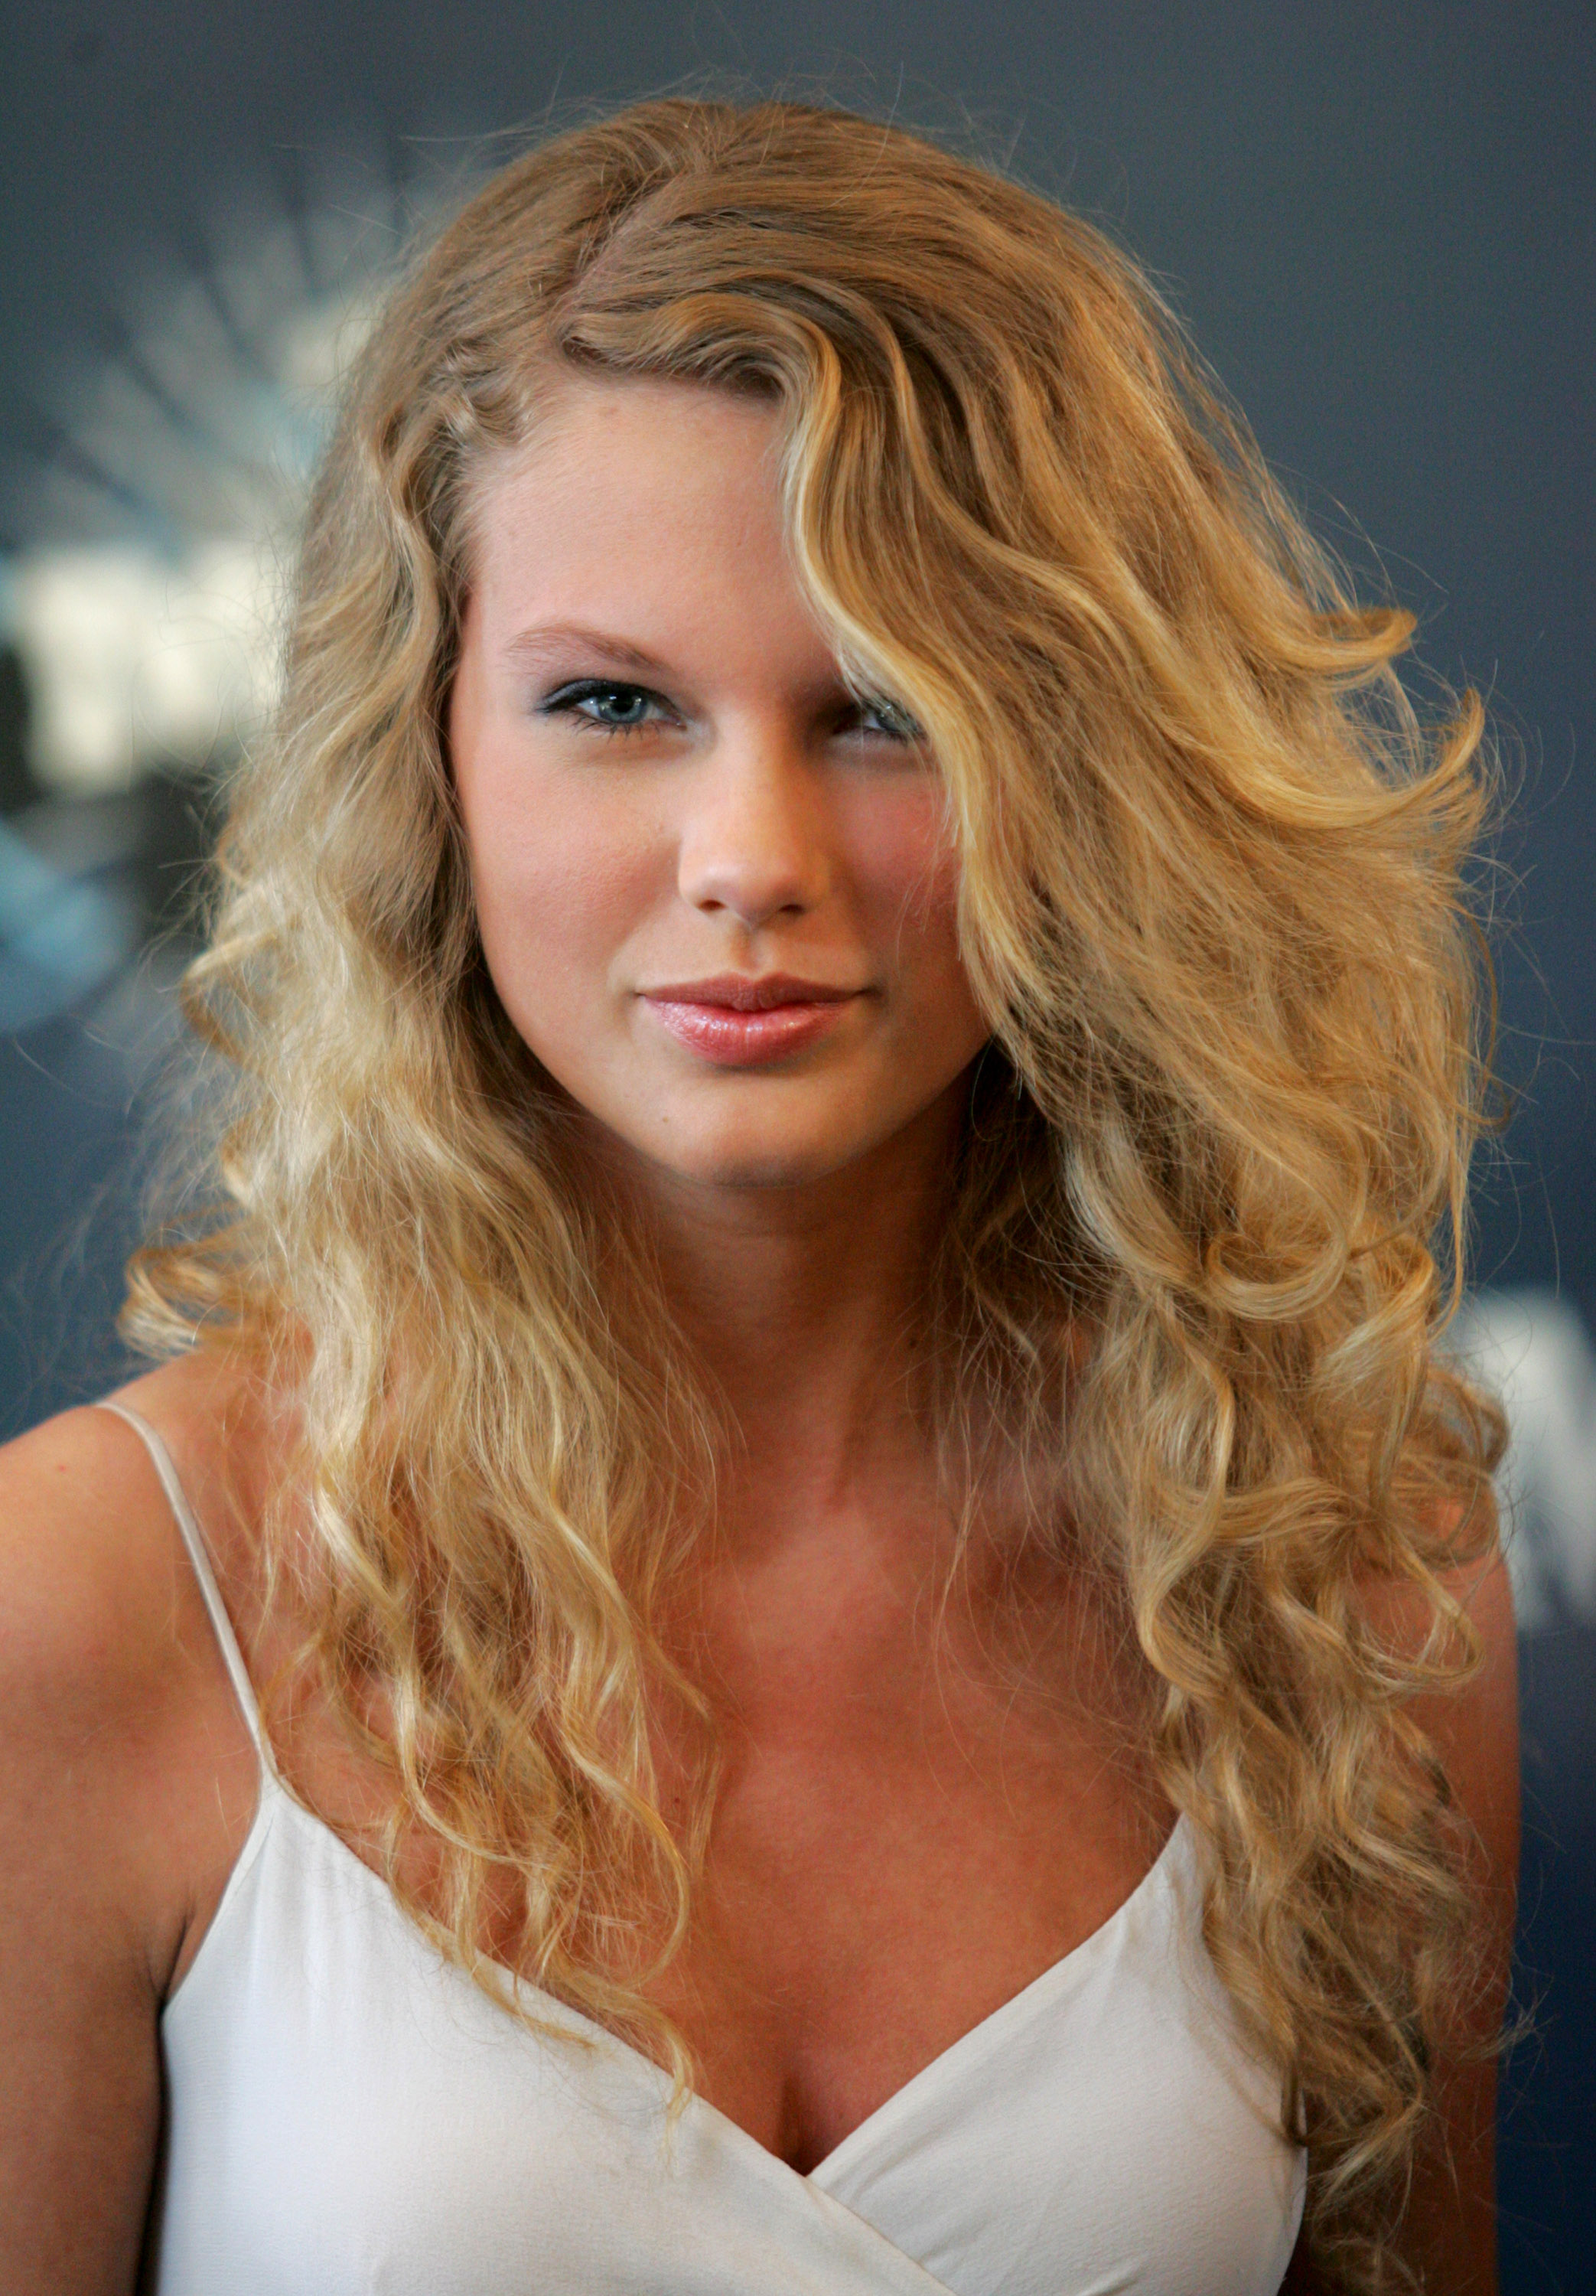 Taylor Swift attends the 2006 CMT Music Awards at Curb Event Center at Belmont University on April 10, 2006 in Nashville, Tennessee. | Source: Getty Images